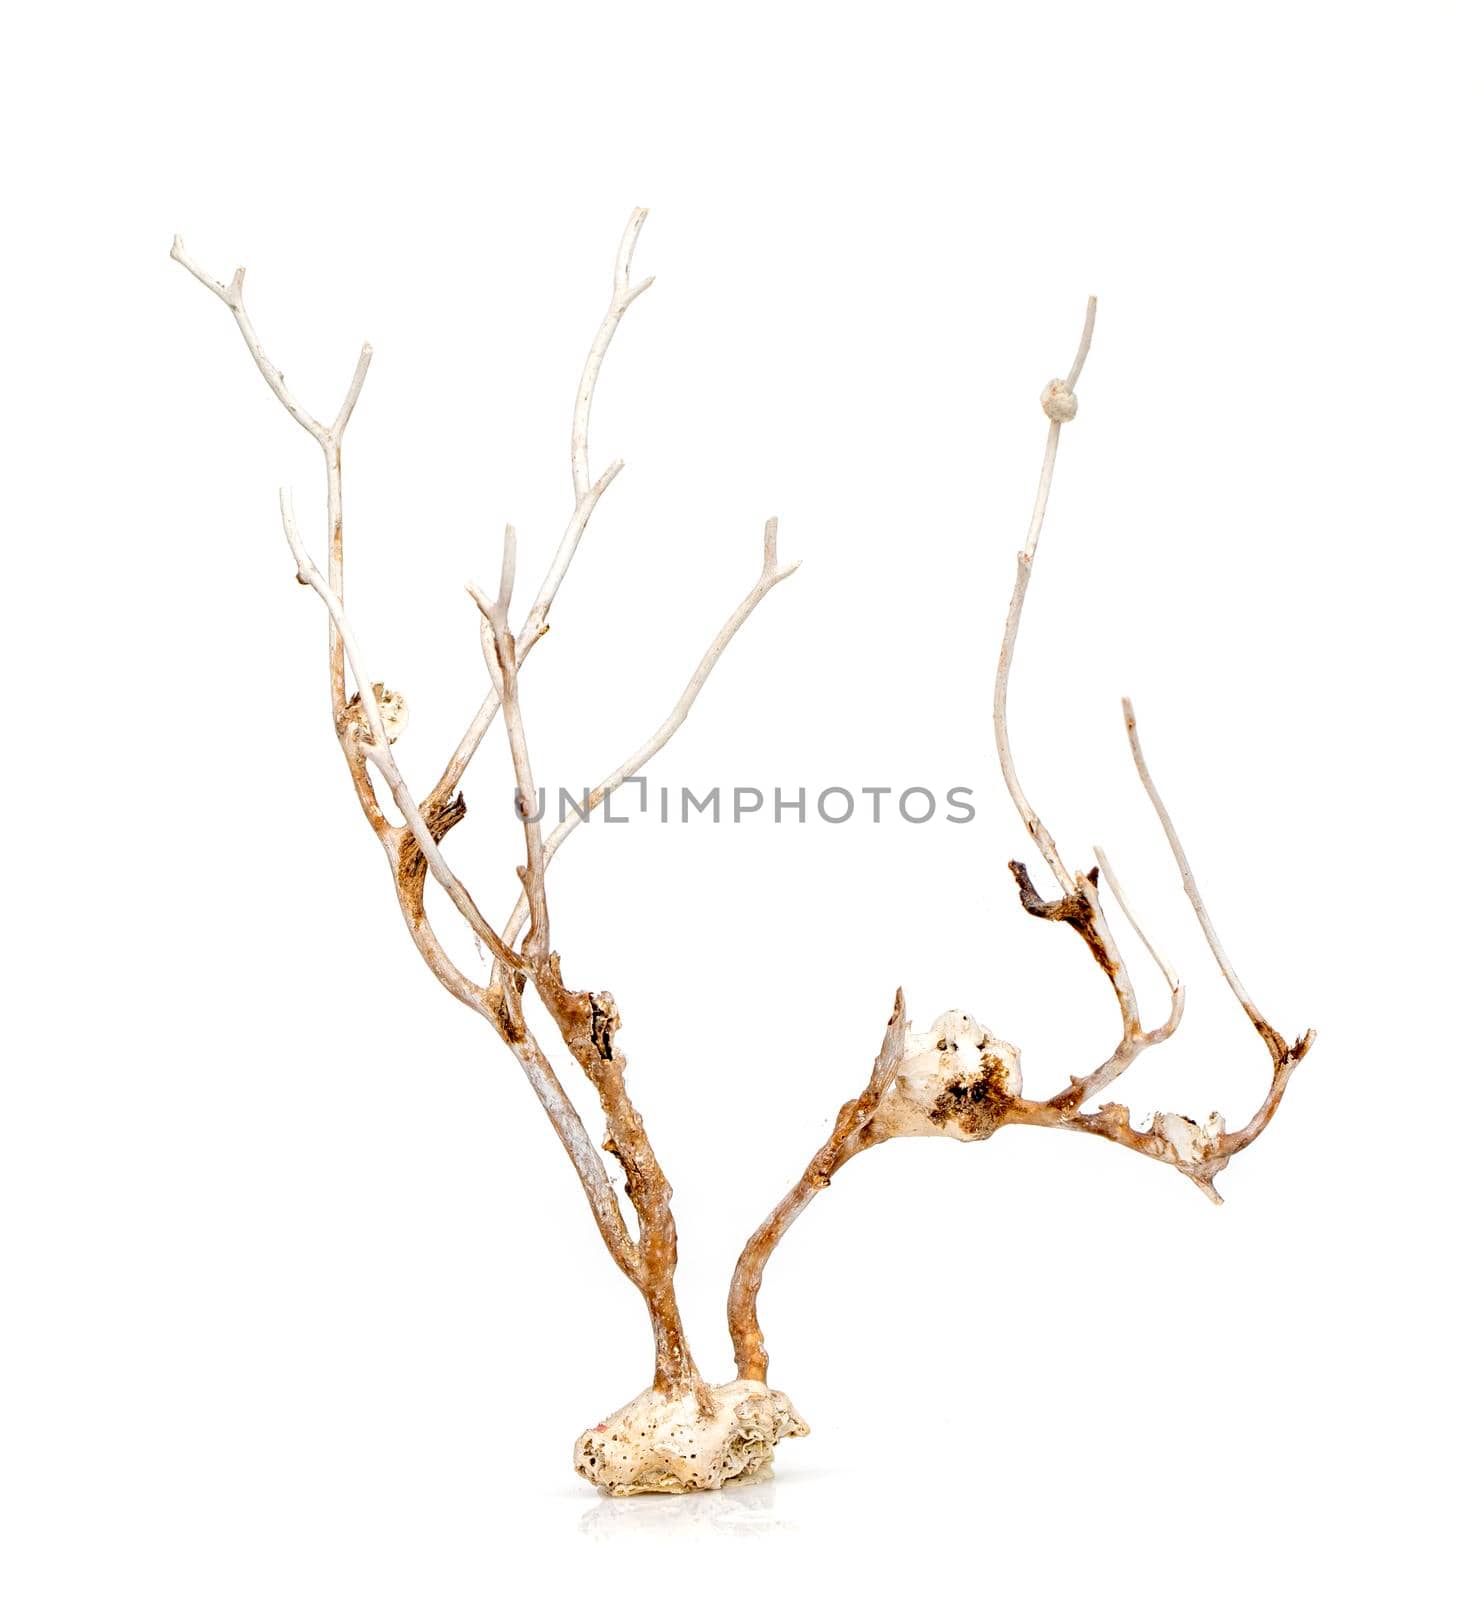 Image of dry natural coral or coralline isolated on white background.